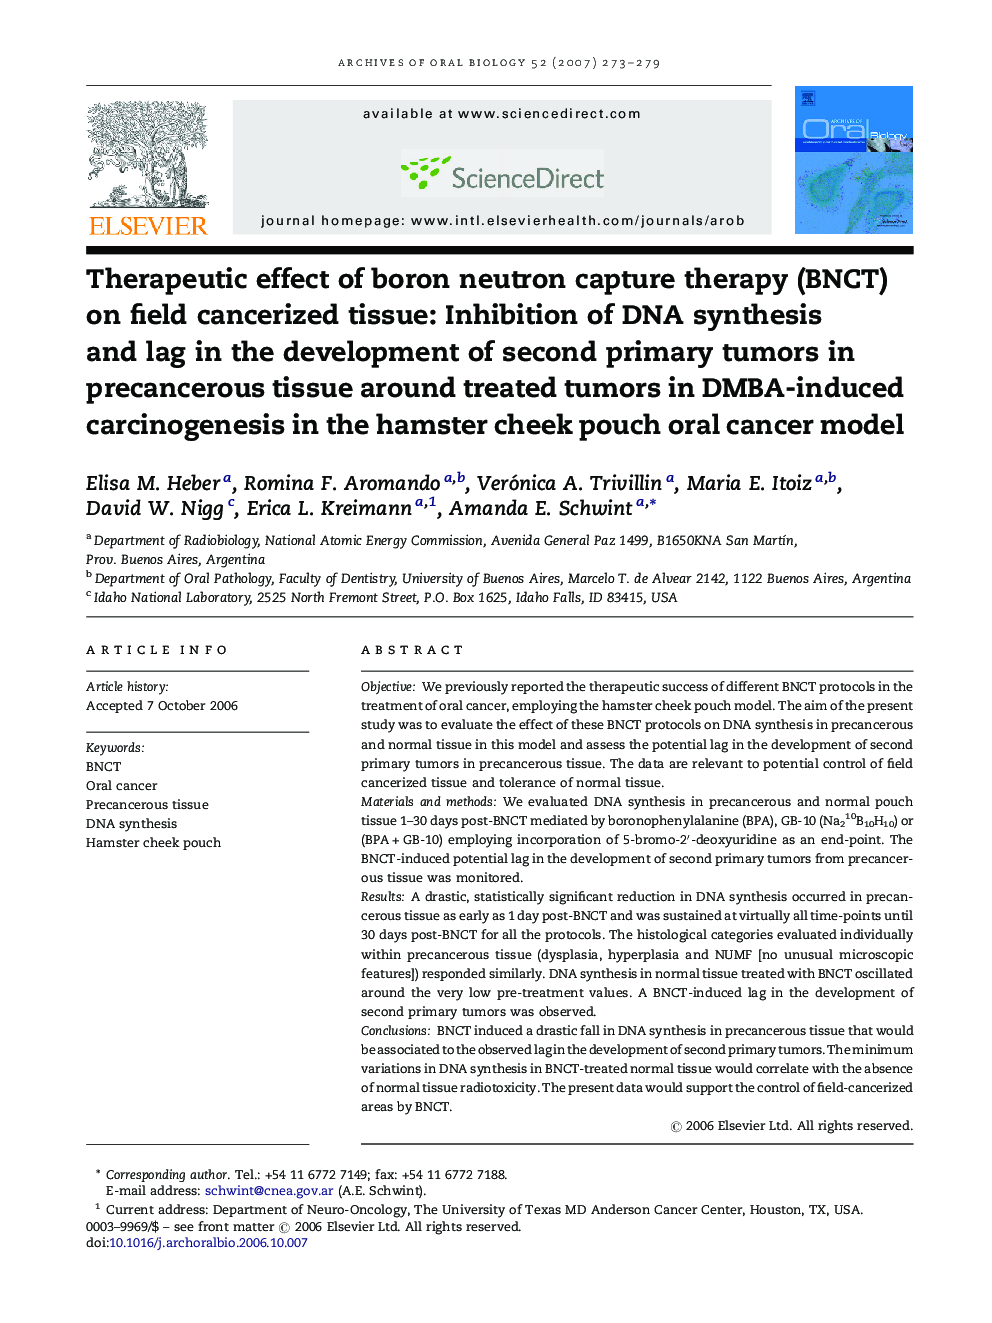 Therapeutic effect of boron neutron capture therapy (BNCT) on field cancerized tissue: Inhibition of DNA synthesis and lag in the development of second primary tumors in precancerous tissue around treated tumors in DMBA-induced carcinogenesis in the hamst